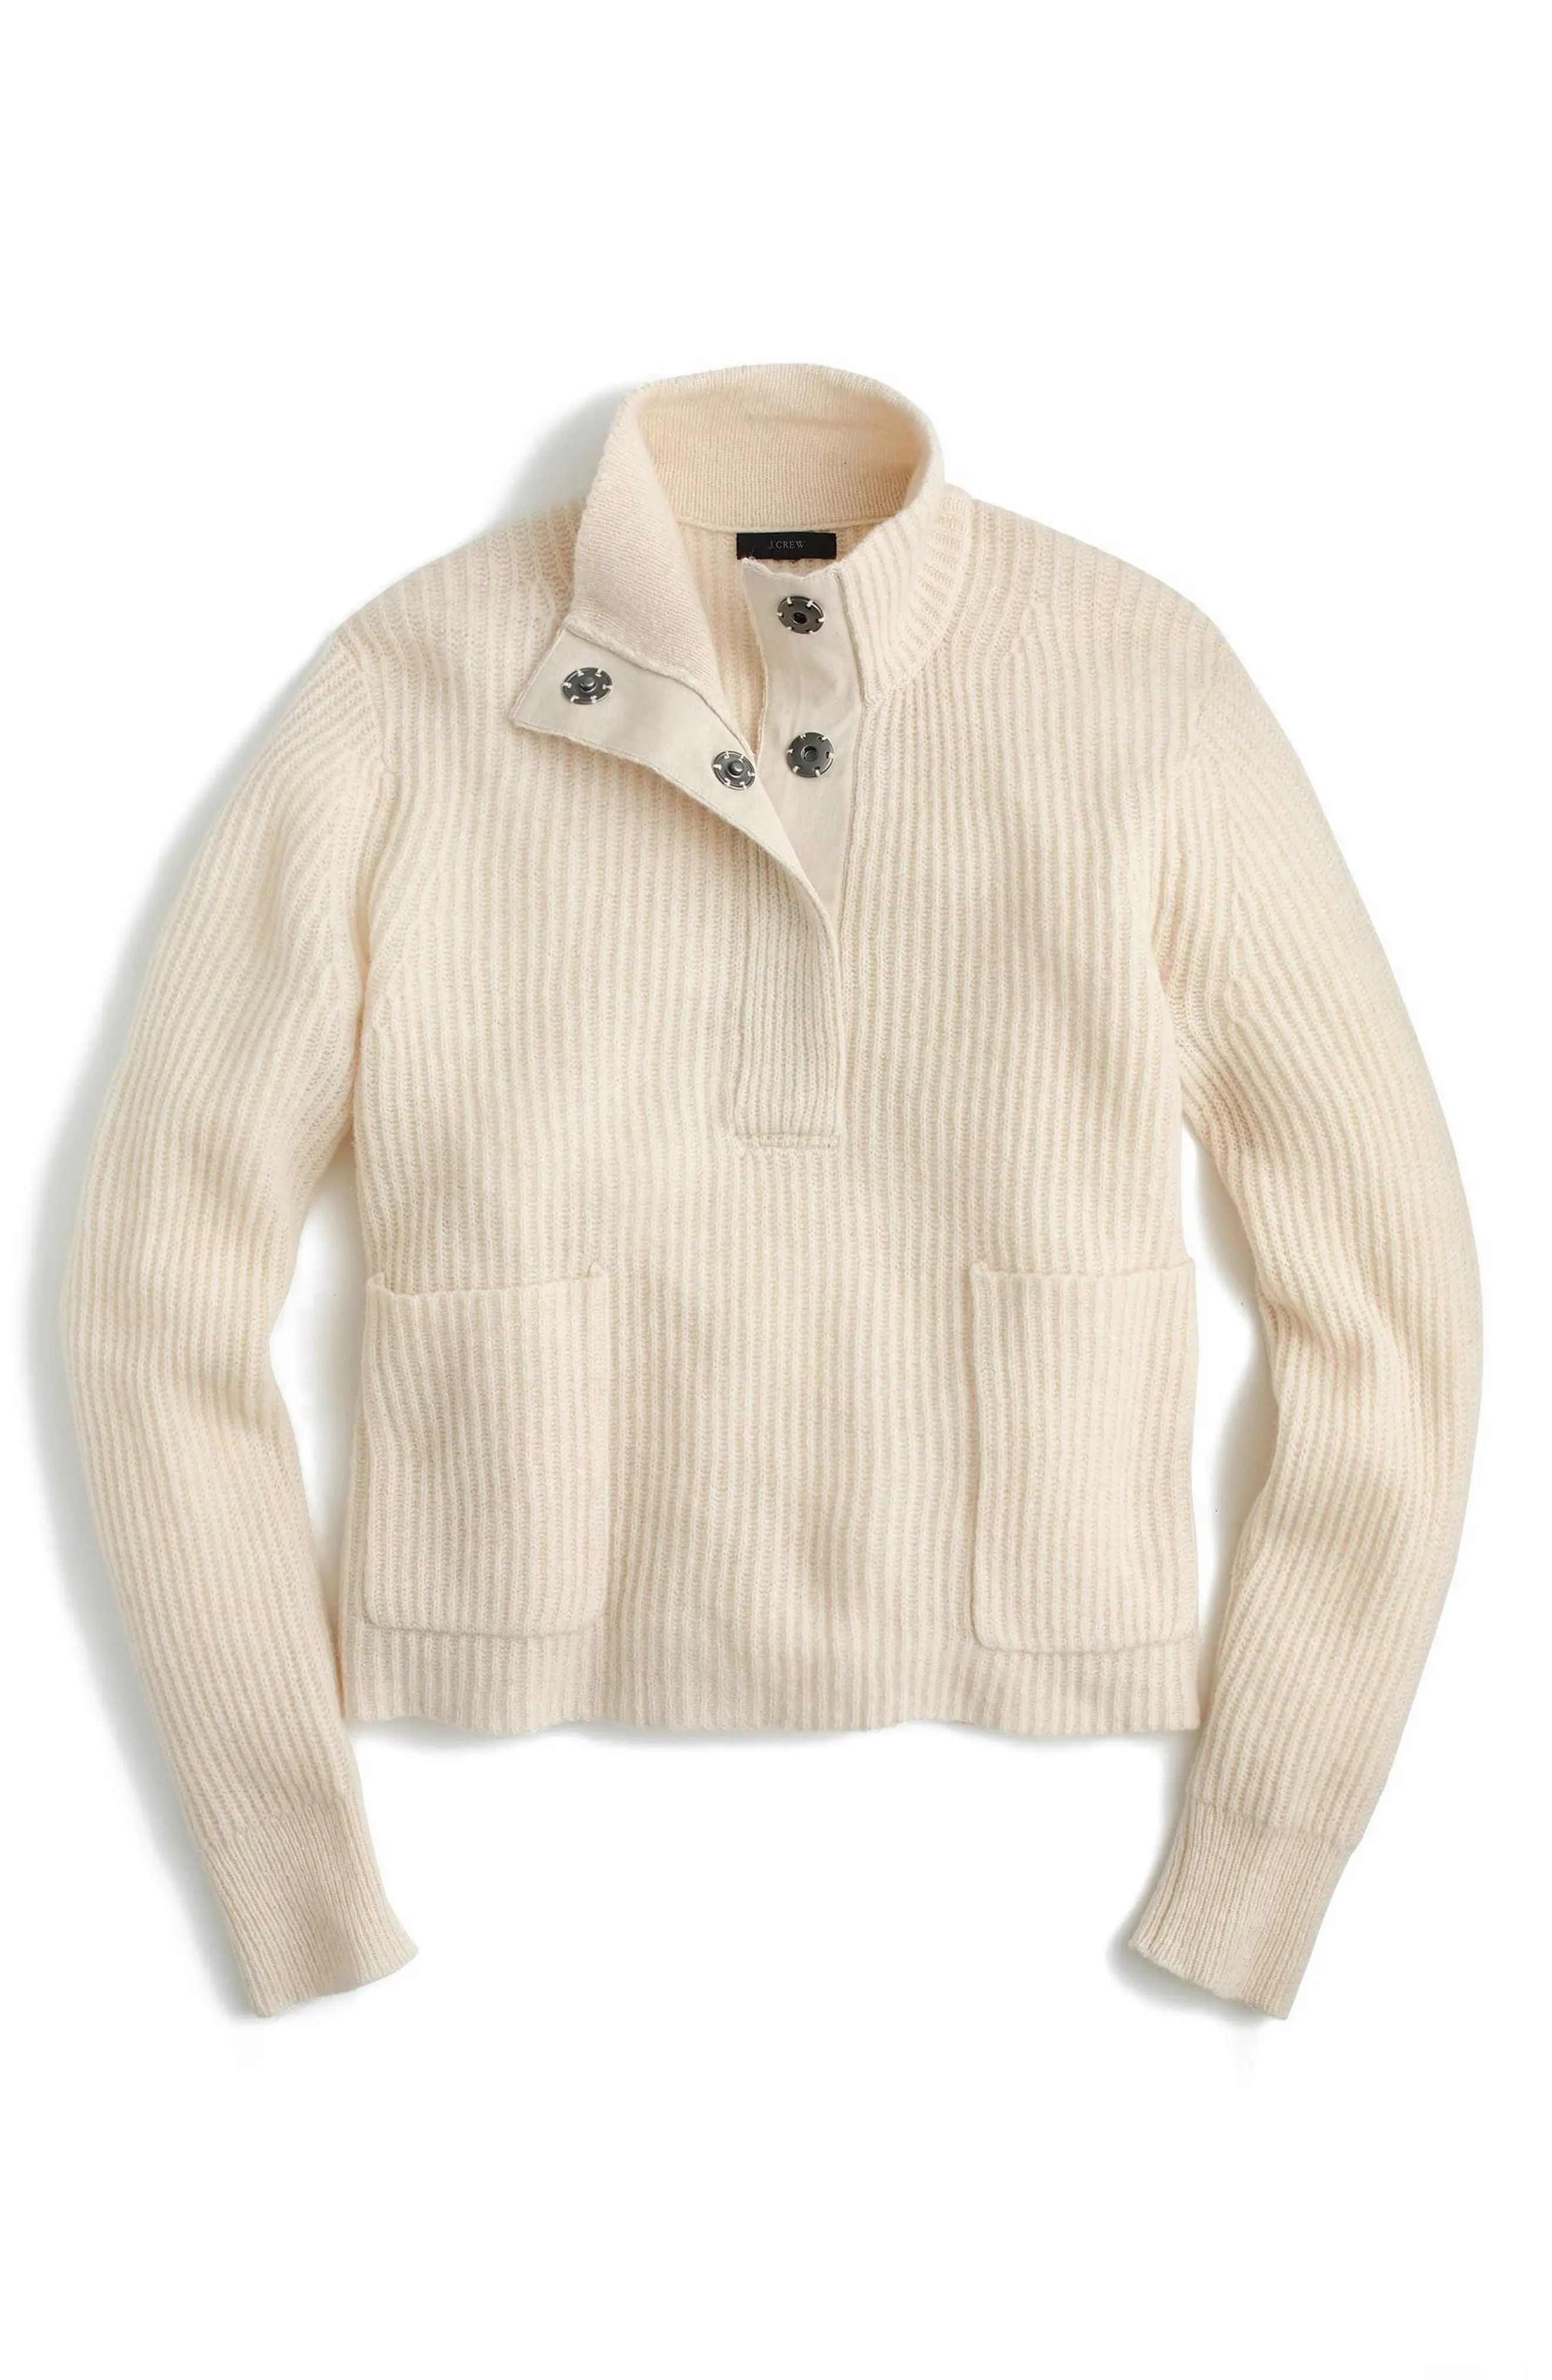 J.Crew Kay Lambswool Pullover Sweater | Nordstrom